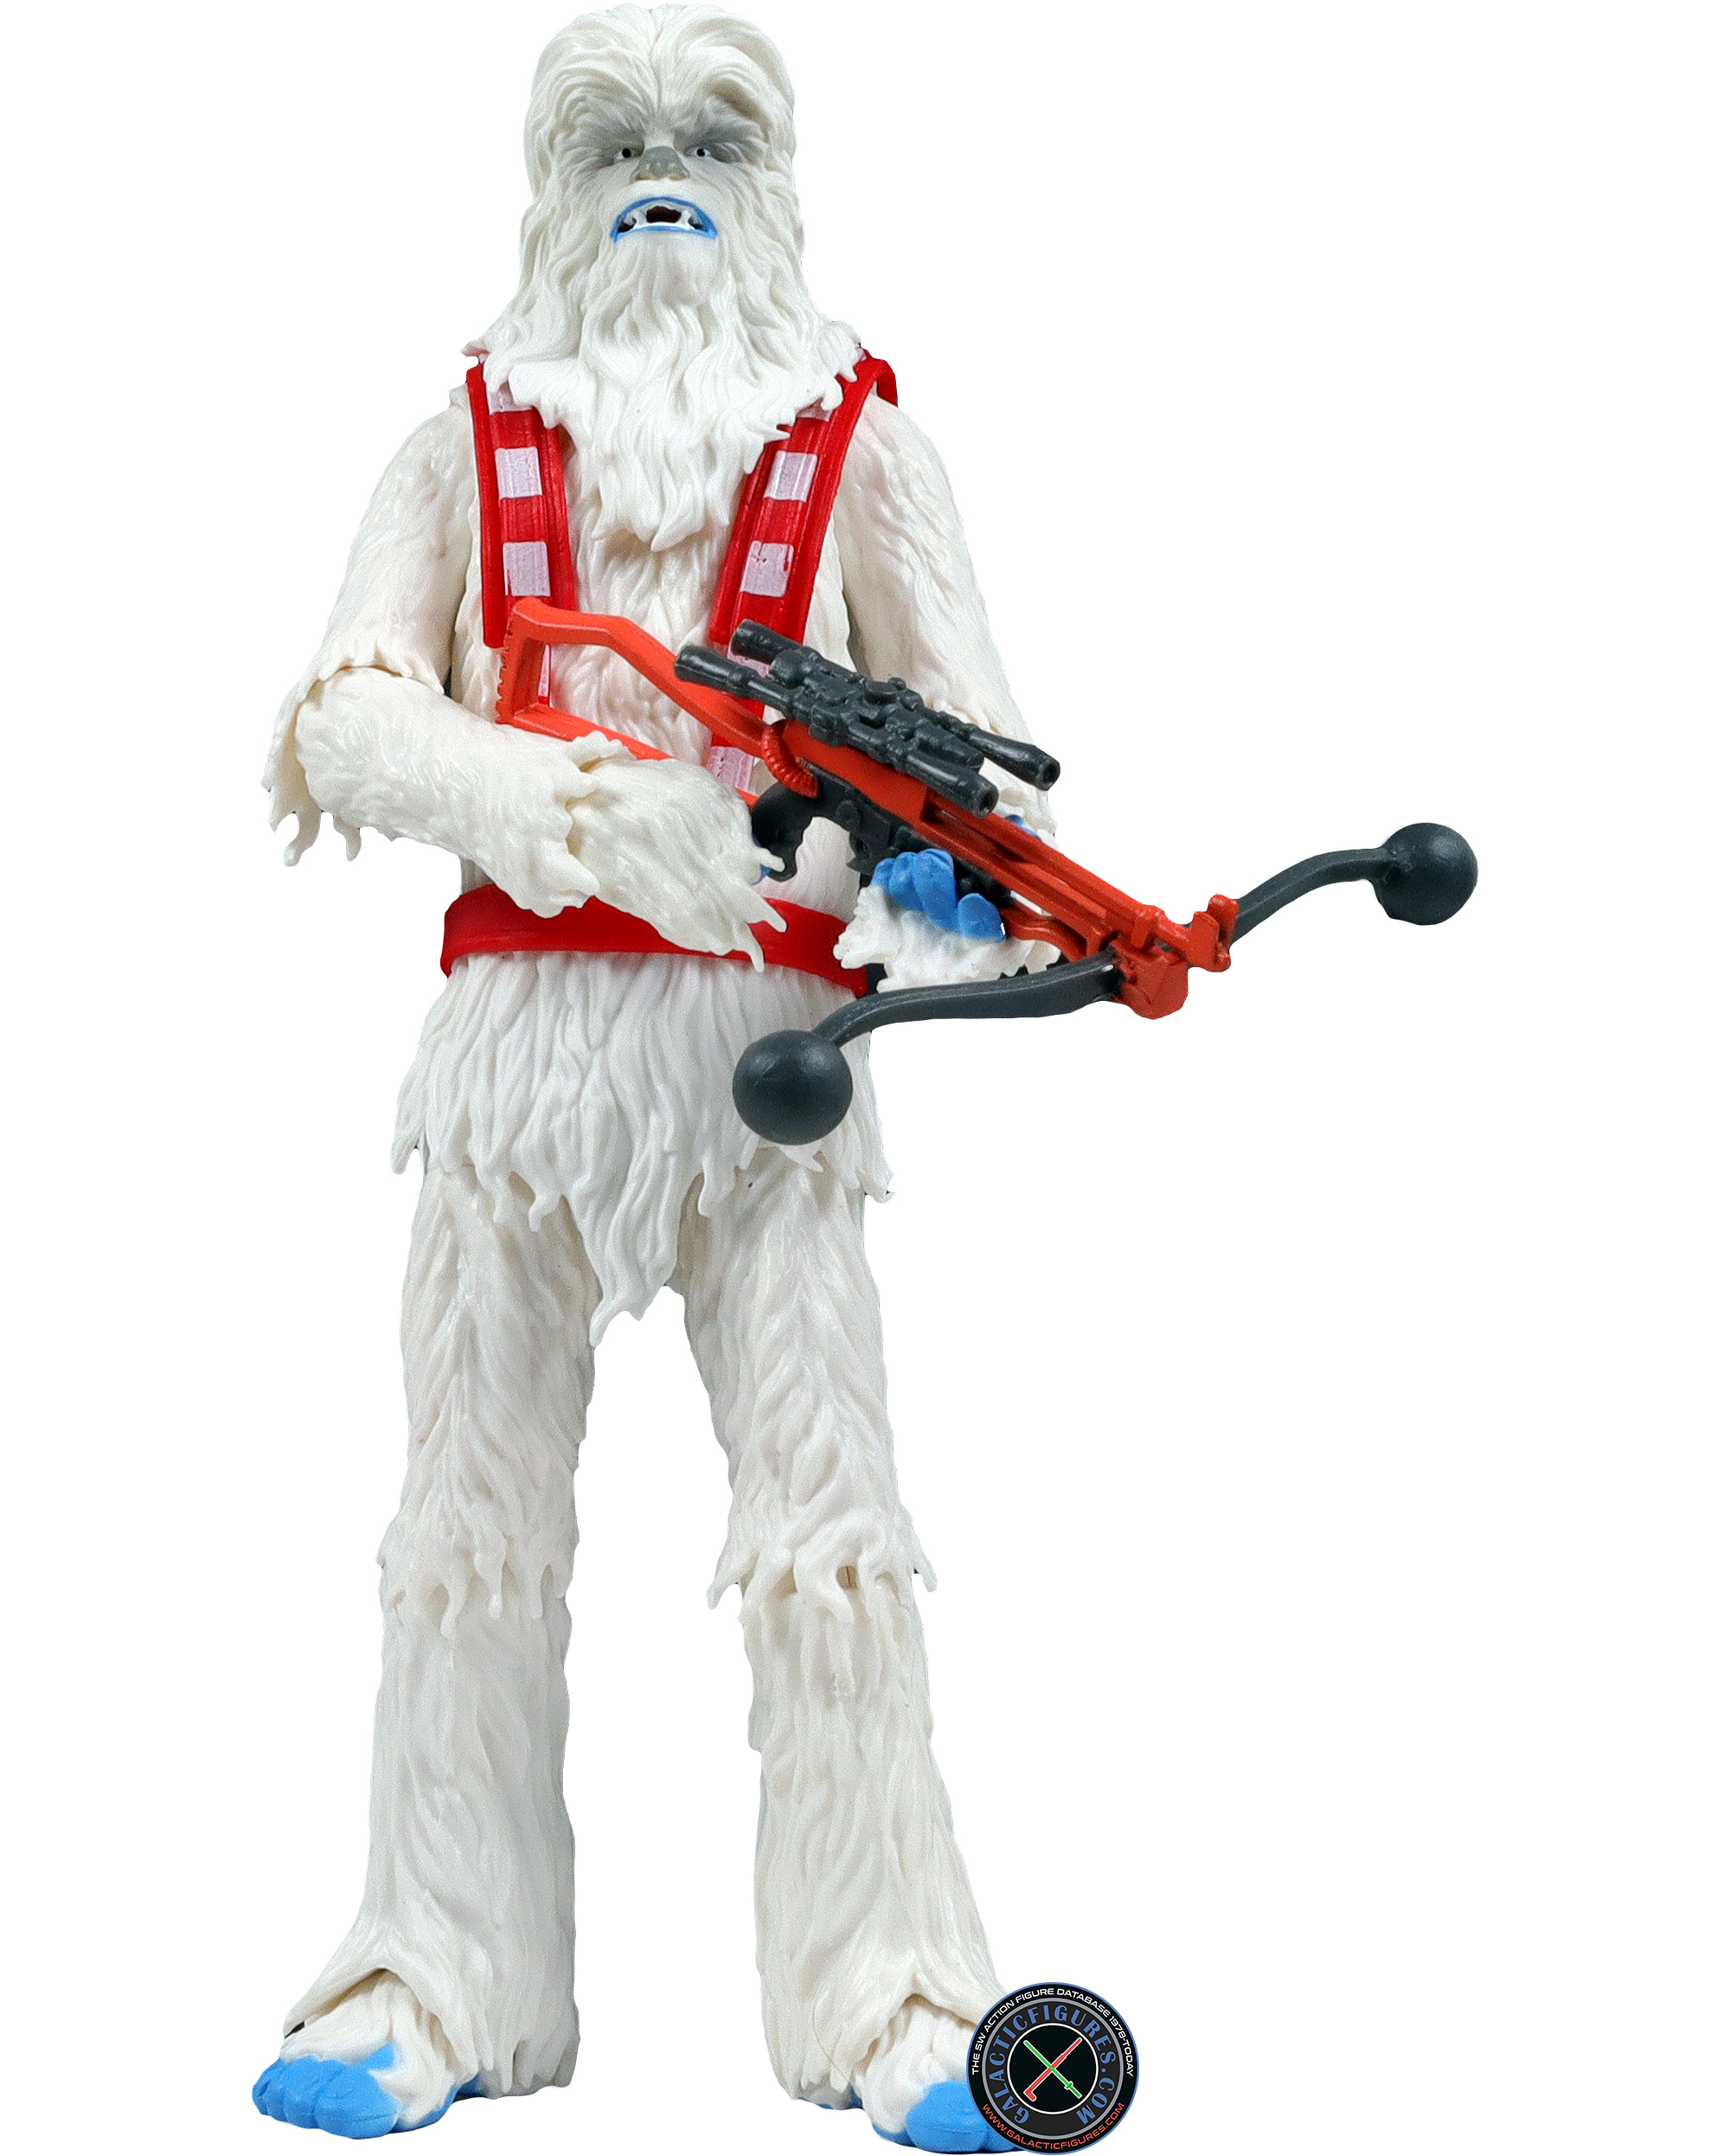 Wookiee 2022 Holiday Edition 2-Pack #1 of 6